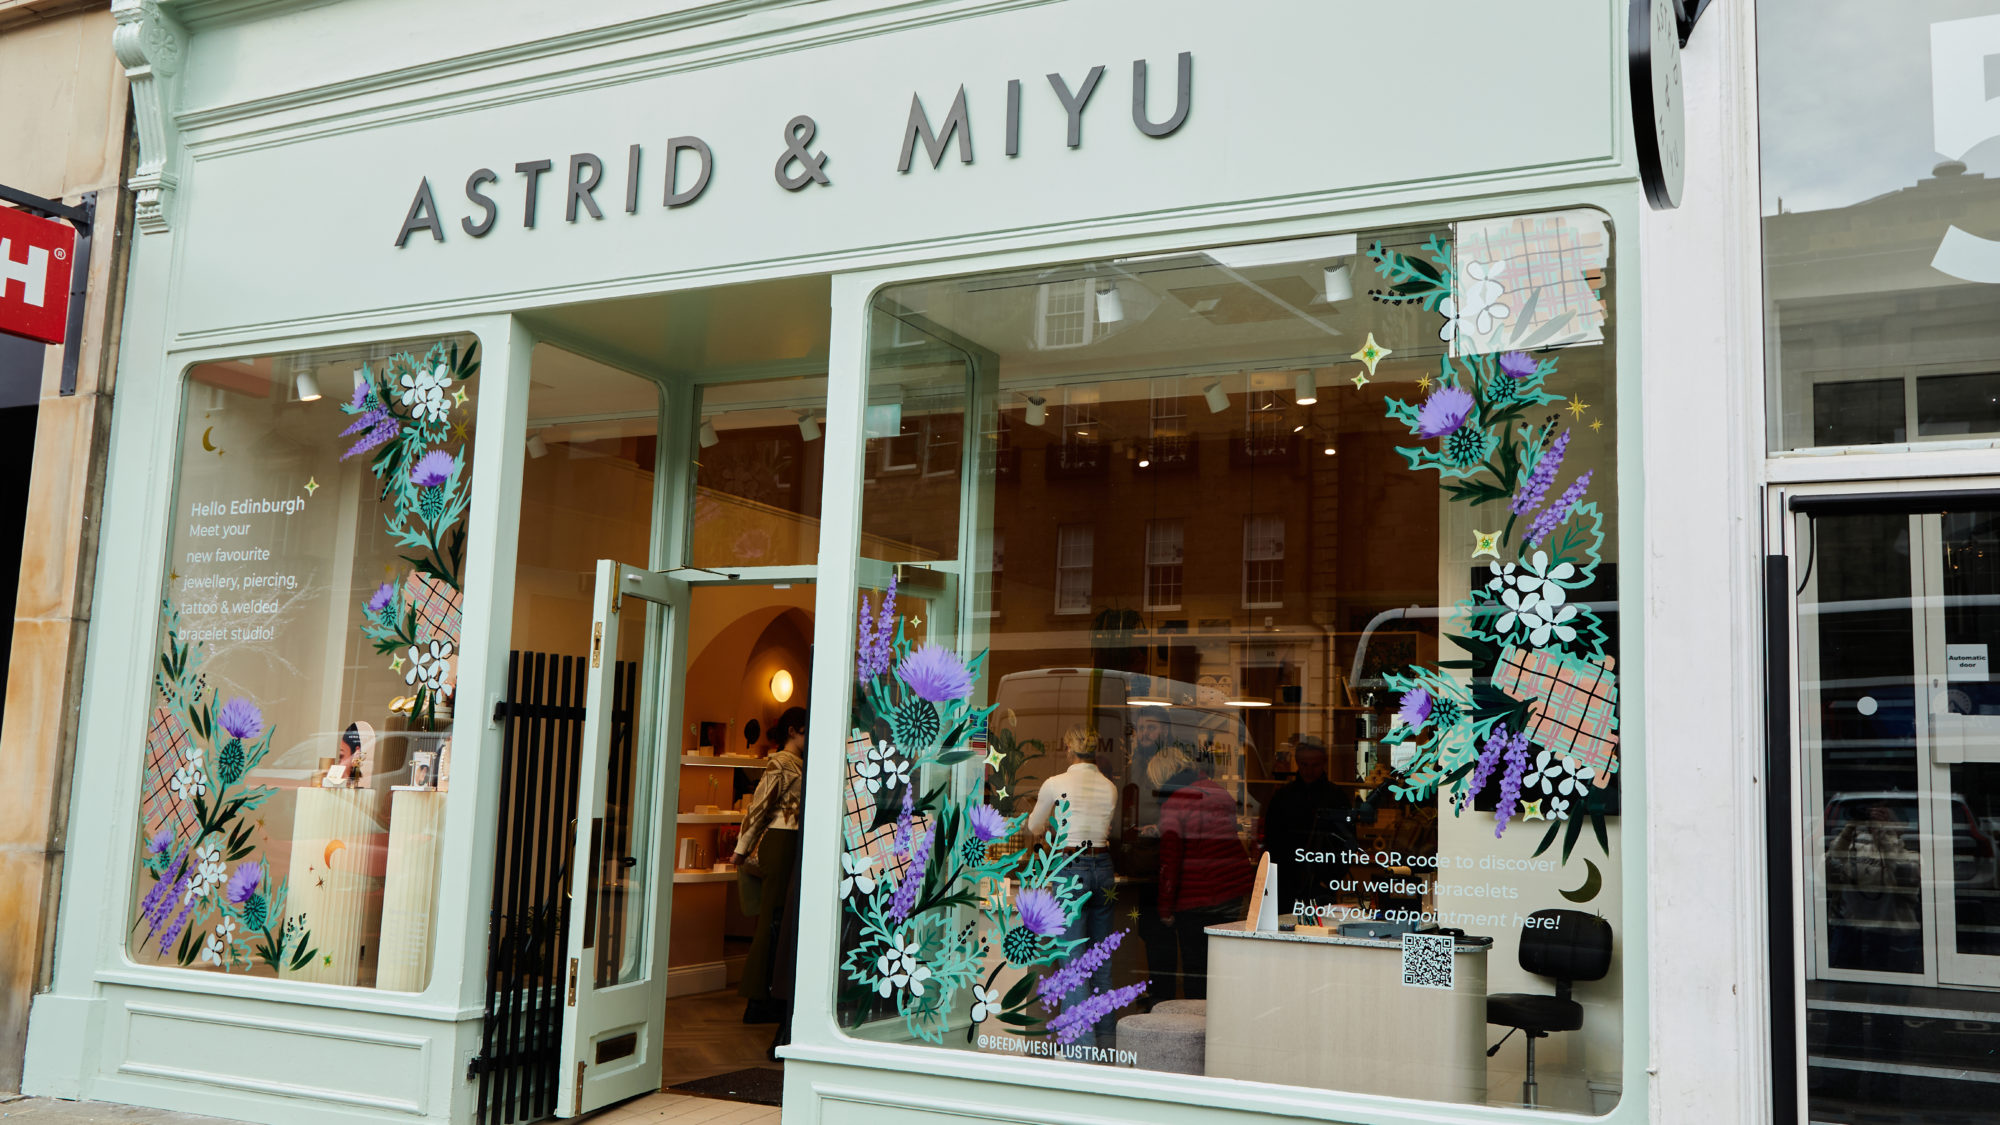 Astrid & Miyu sees 40 per cent boost to total revenue